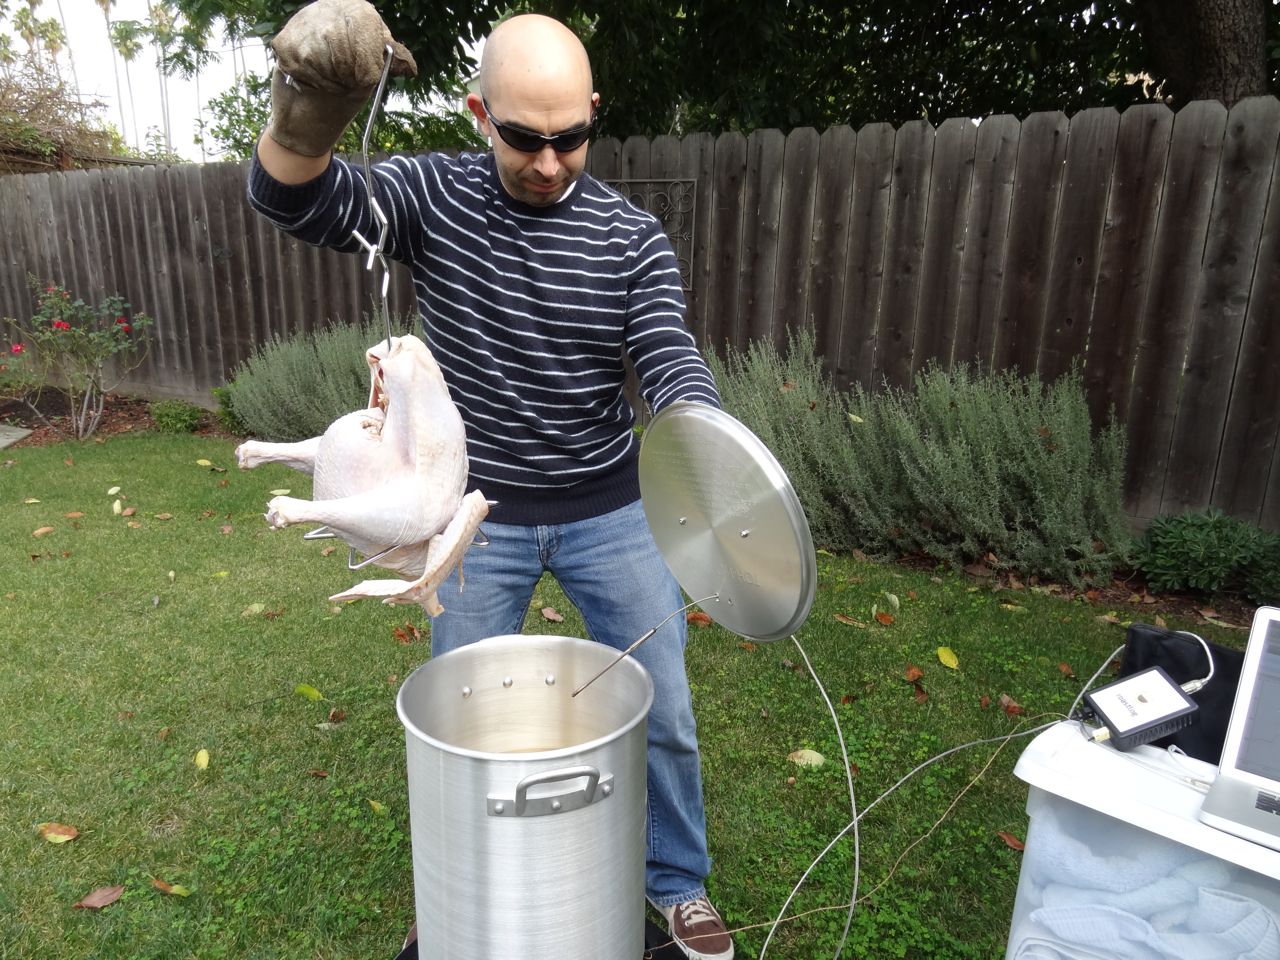 Gently placing the turkey in the oil